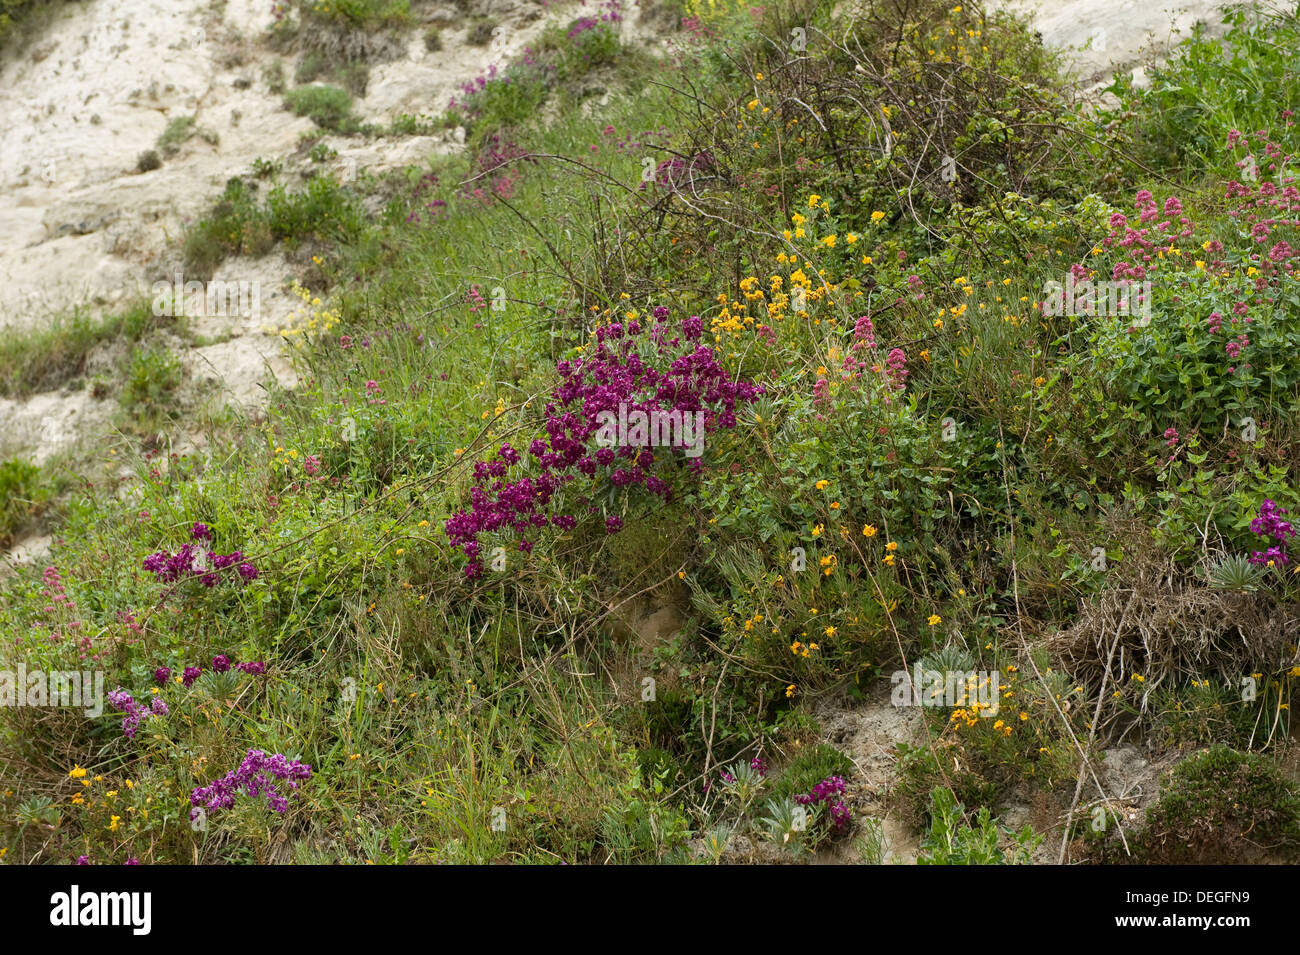 Hoary stock, Matthiola incana, flowering with other vegetation on the cliffs at Beer Beach in Devon Stock Photo